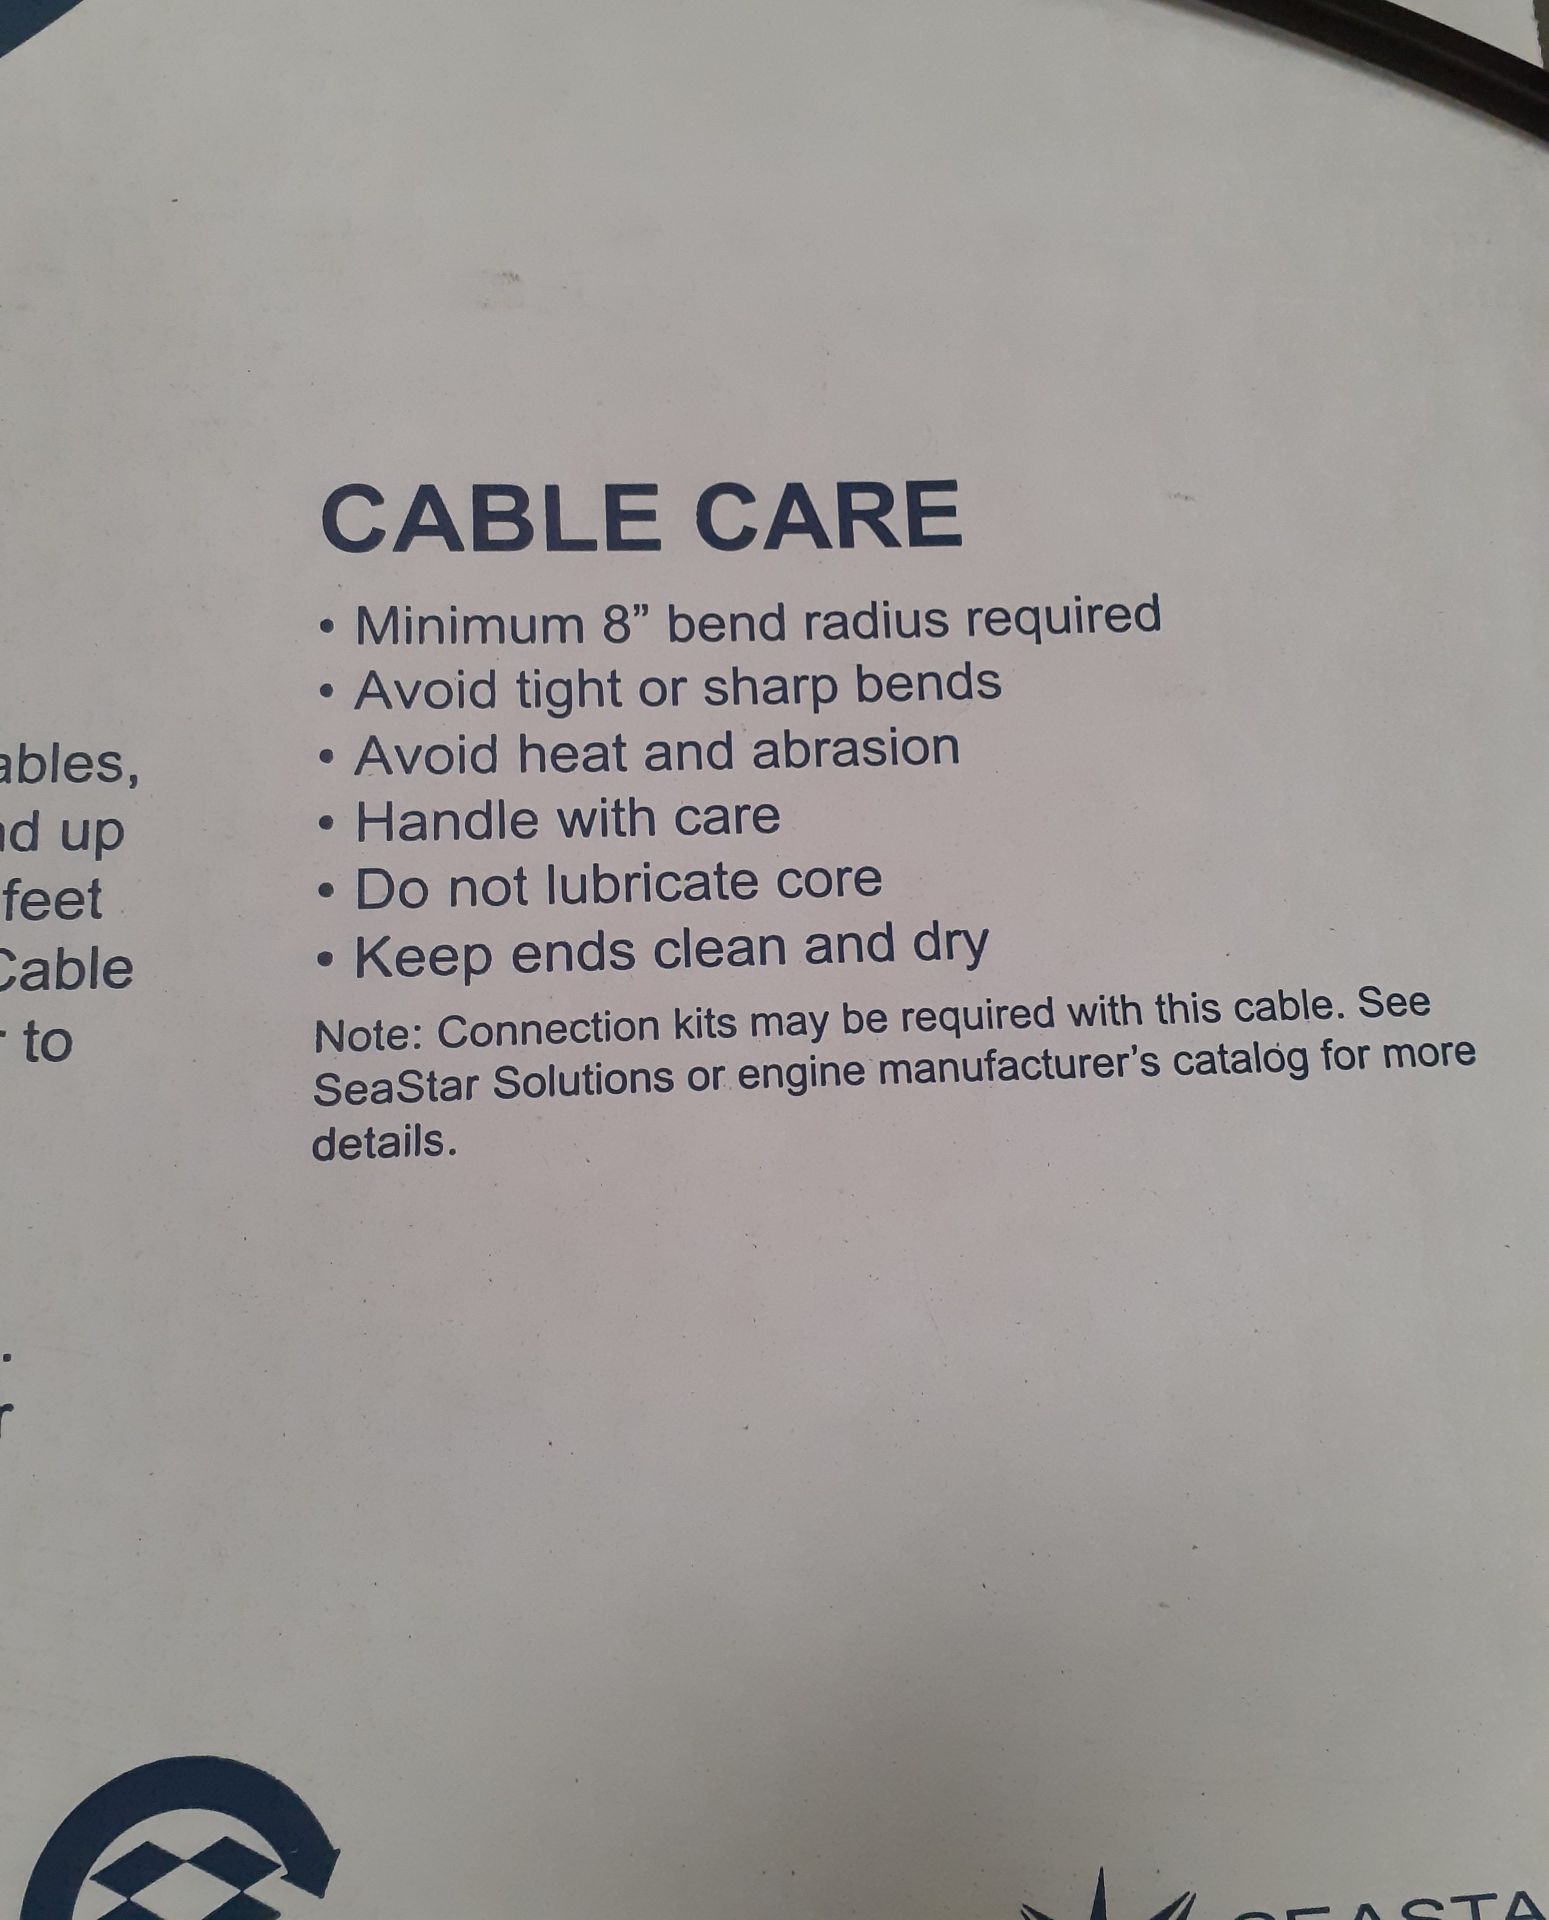 Control cable 5ft Miracable 3300 - CC33005 (Qnty: 2) - Image 2 of 3